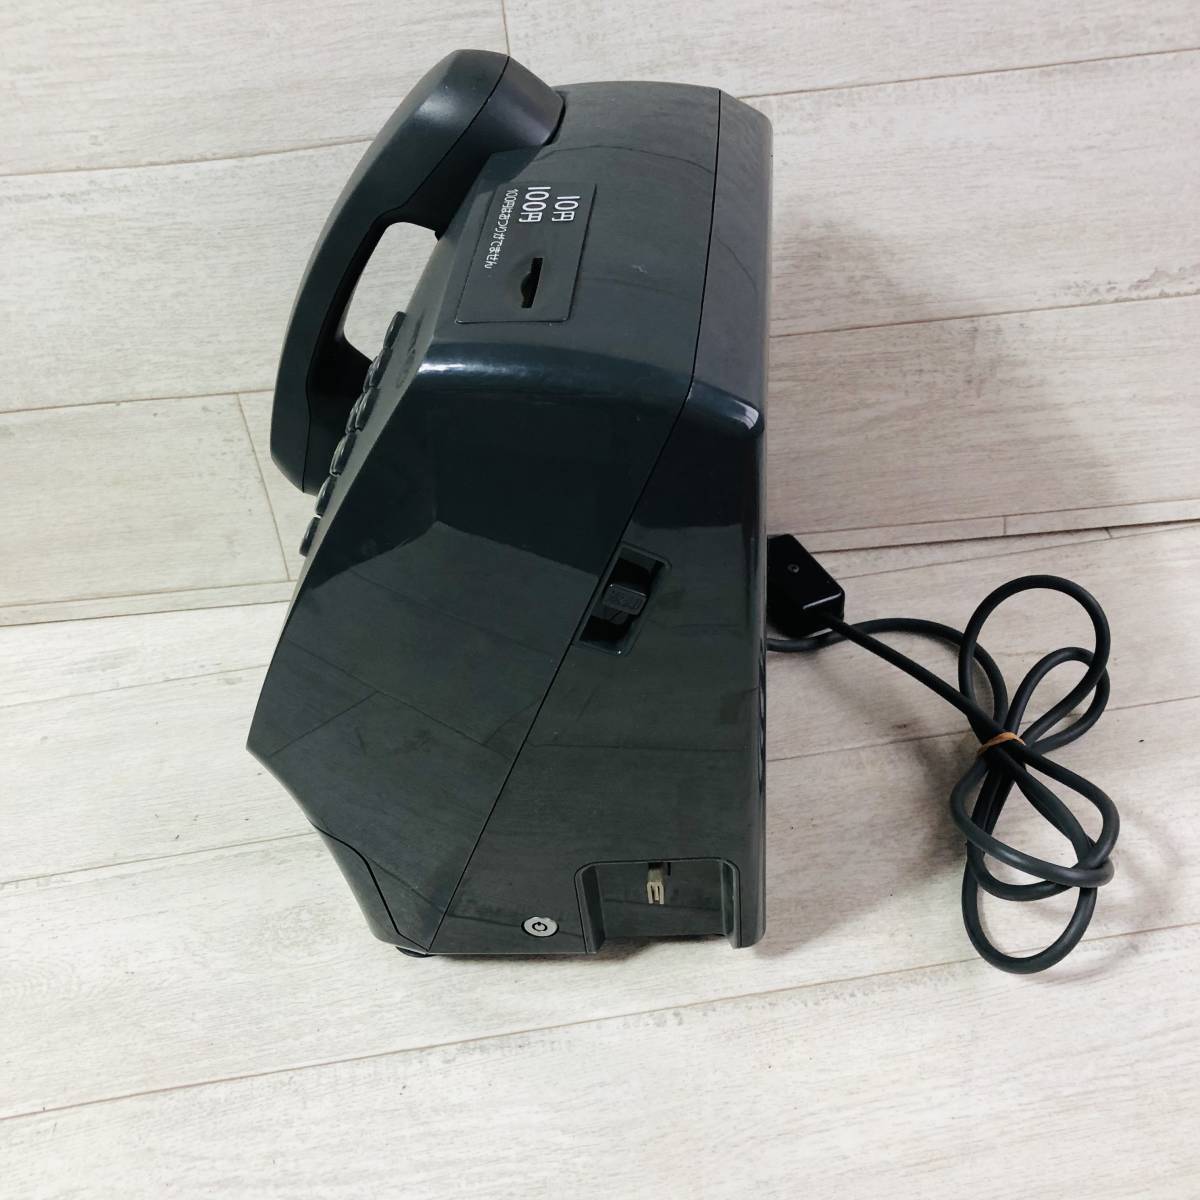 #NTT PT-4 TEL public telephone 1993 year 11 month made Japan electro- confidence telephone operation not yet verification key none objet d'art interior small articles #sa1